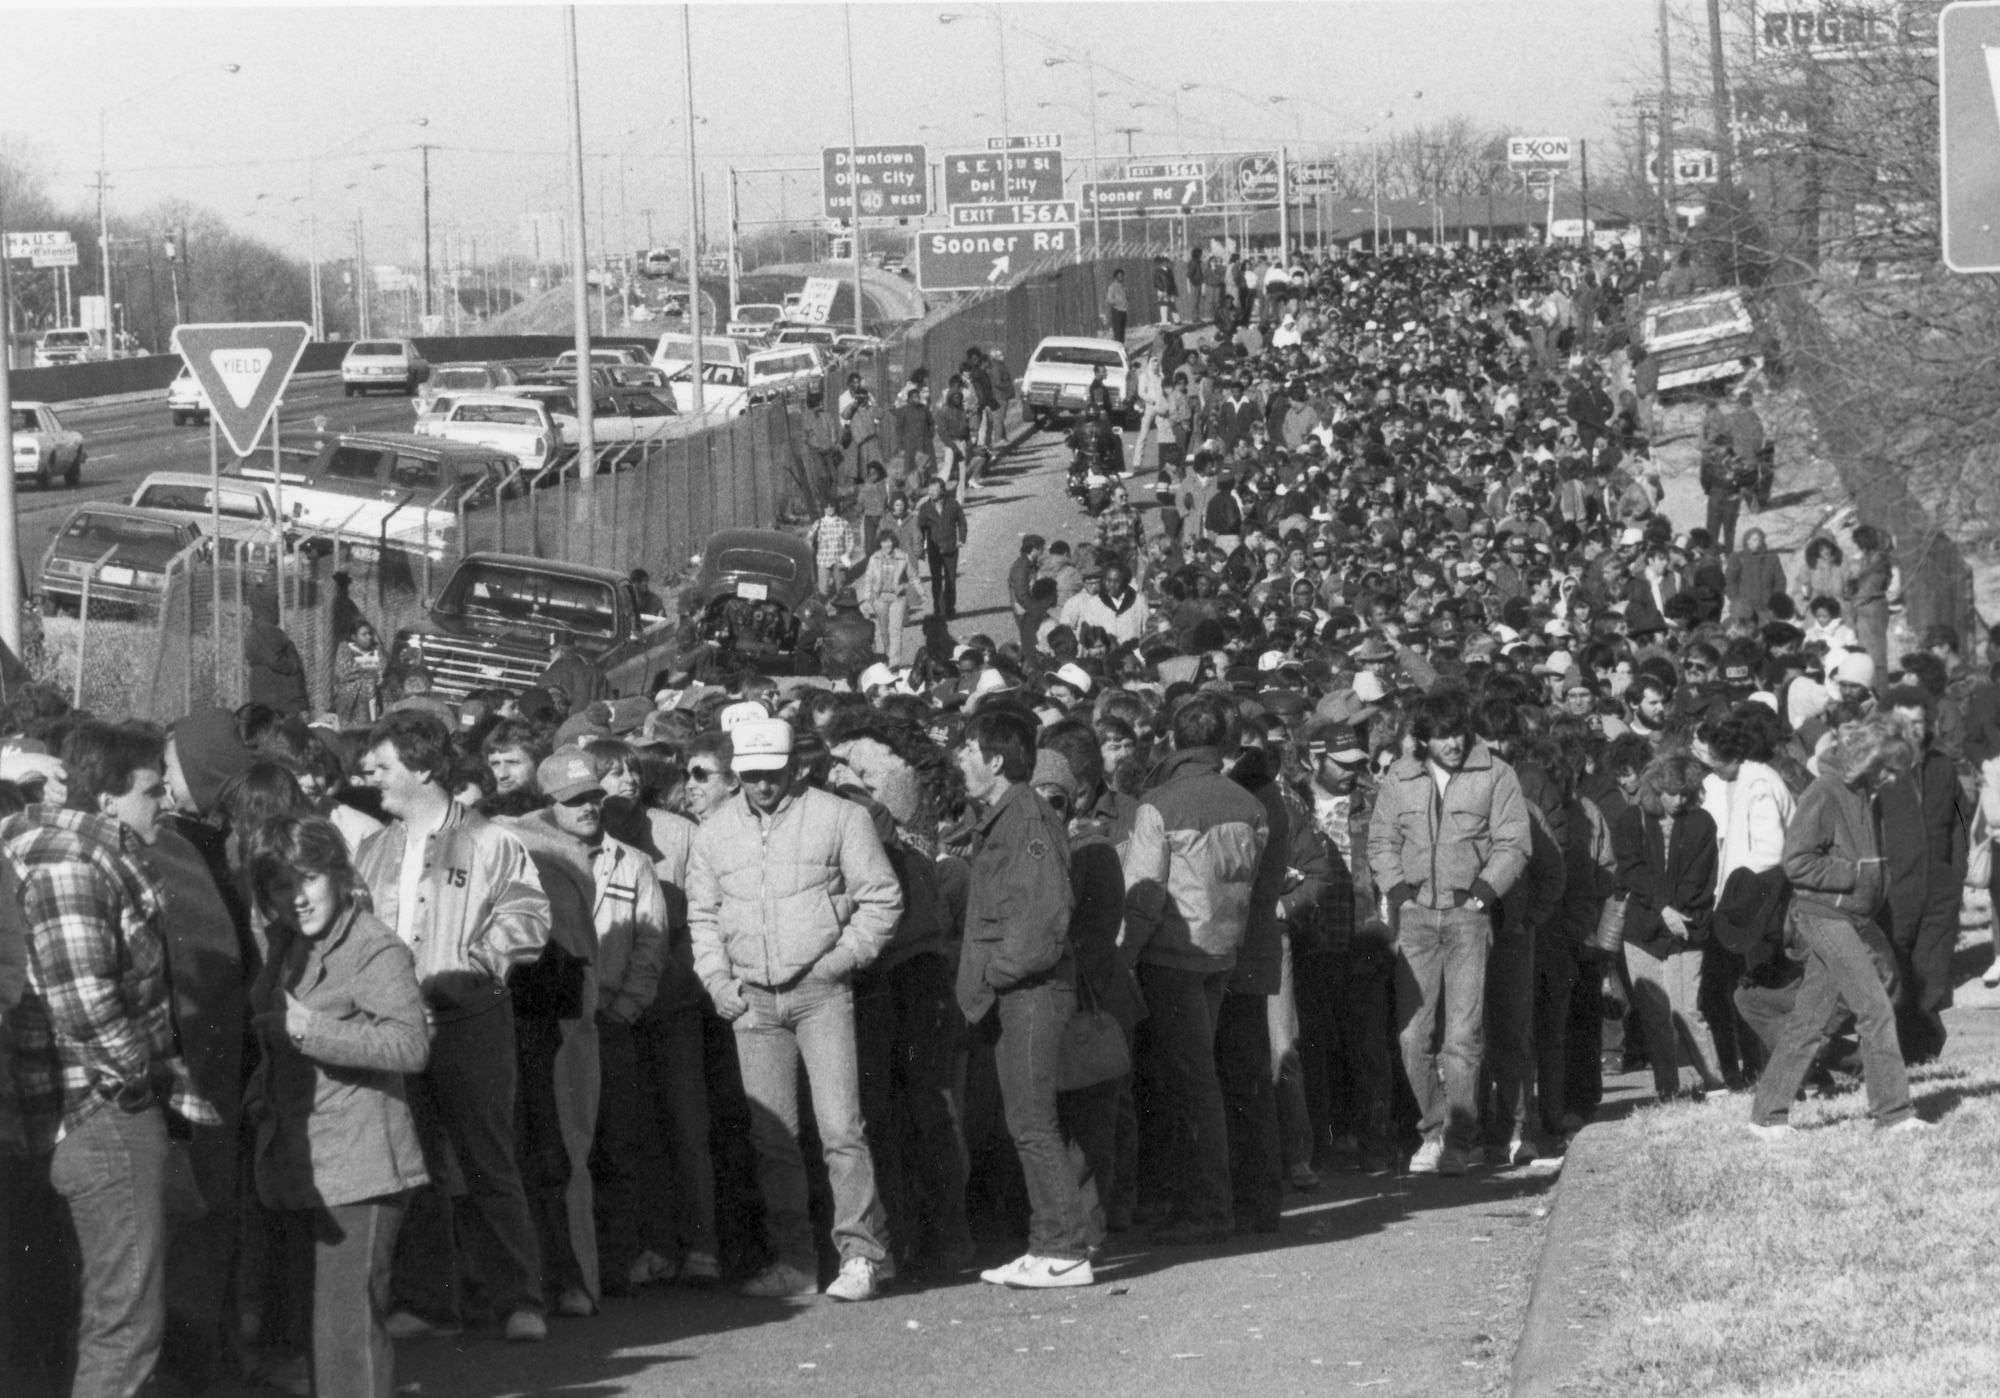 Thousands of job seekers line the streets in January 1986 hoping to get on at Tinker Air Force Base. Civilian Personnel accepted more than 5,000 applications, while establishing a new helper register for the Oklahoma City Air Logistics Center.